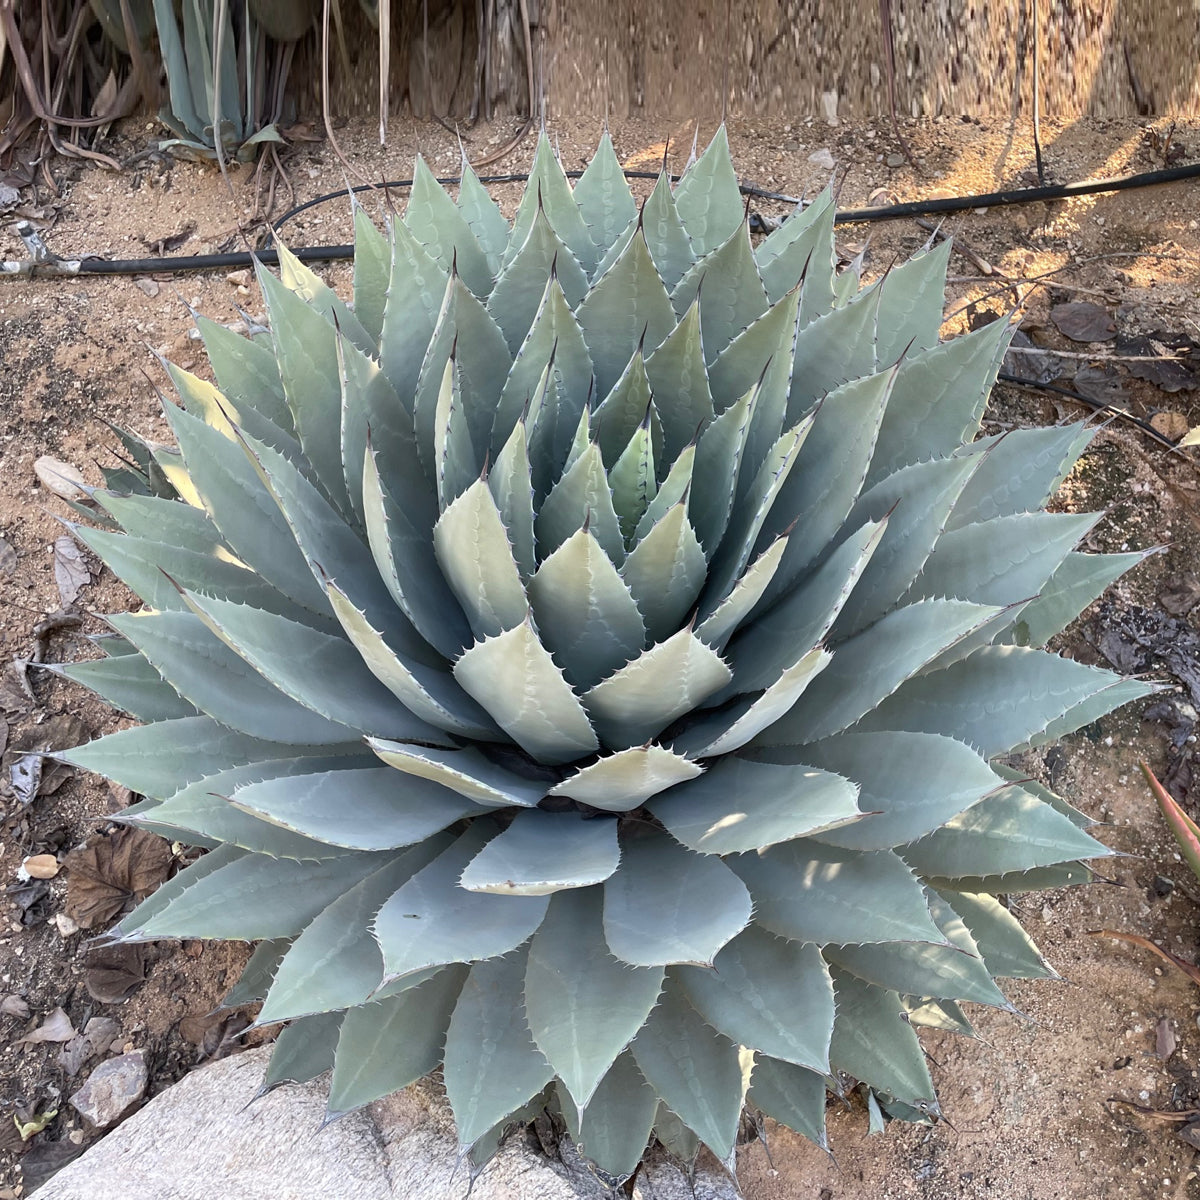 Parry's agave